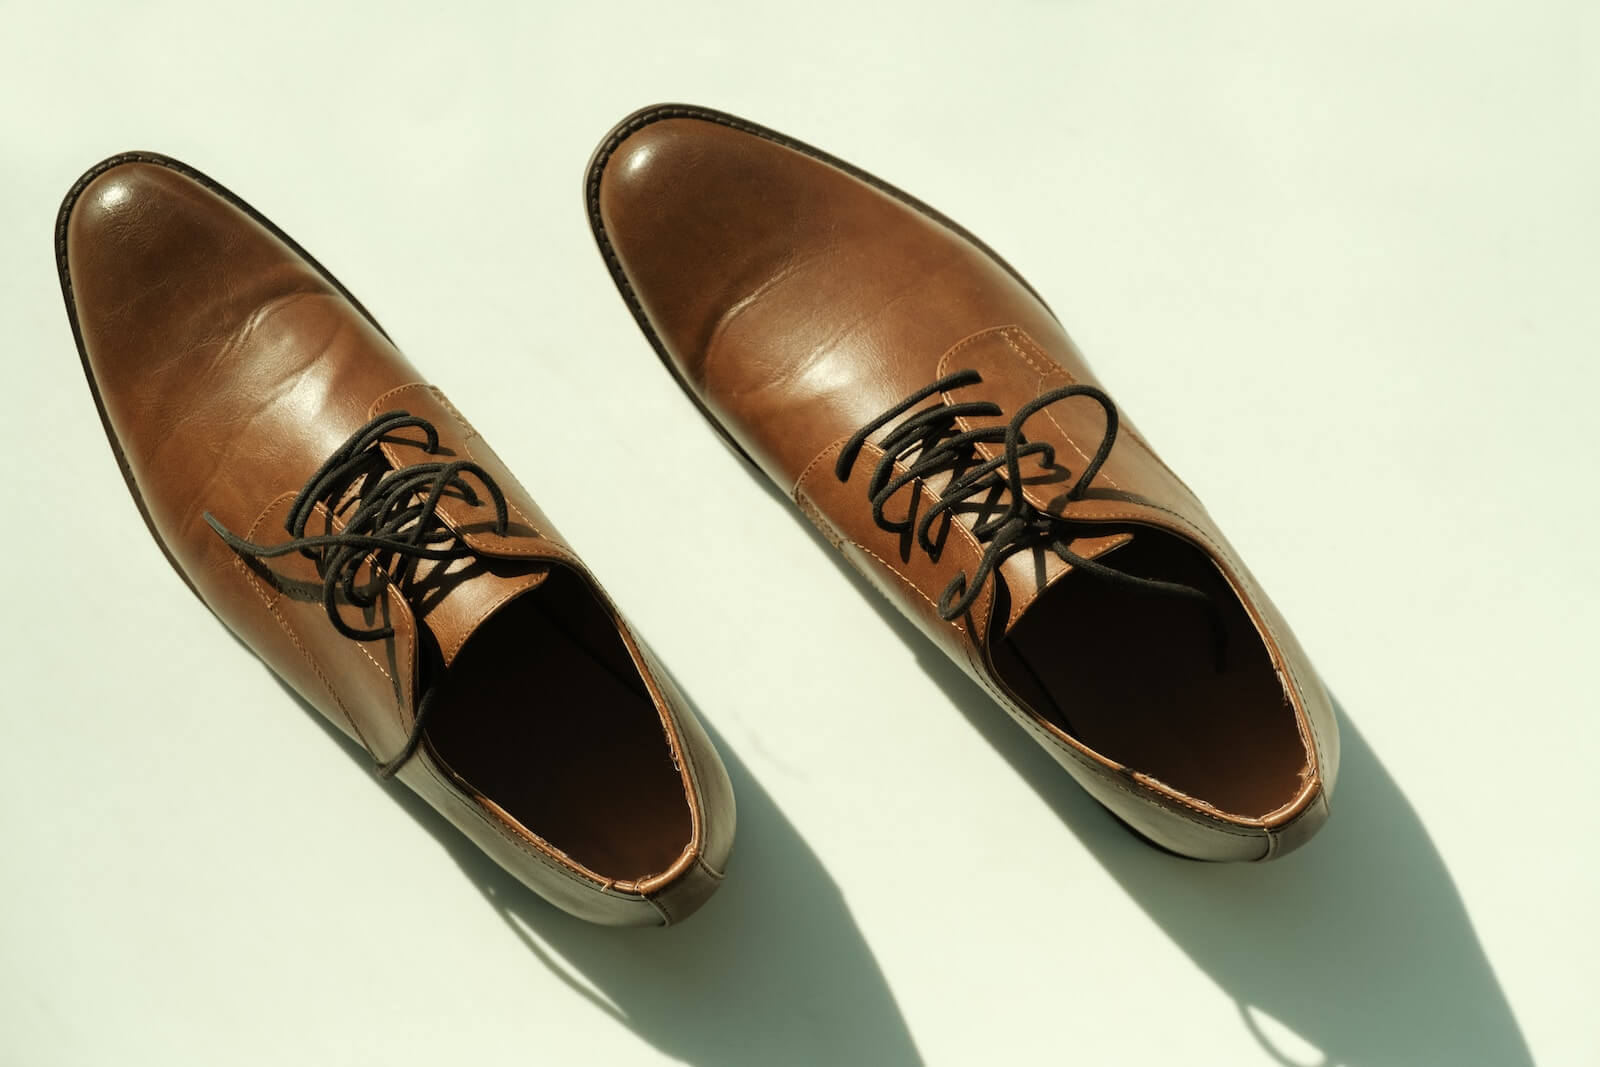 5 New Dress Shoe Companies Every Guy Should Know